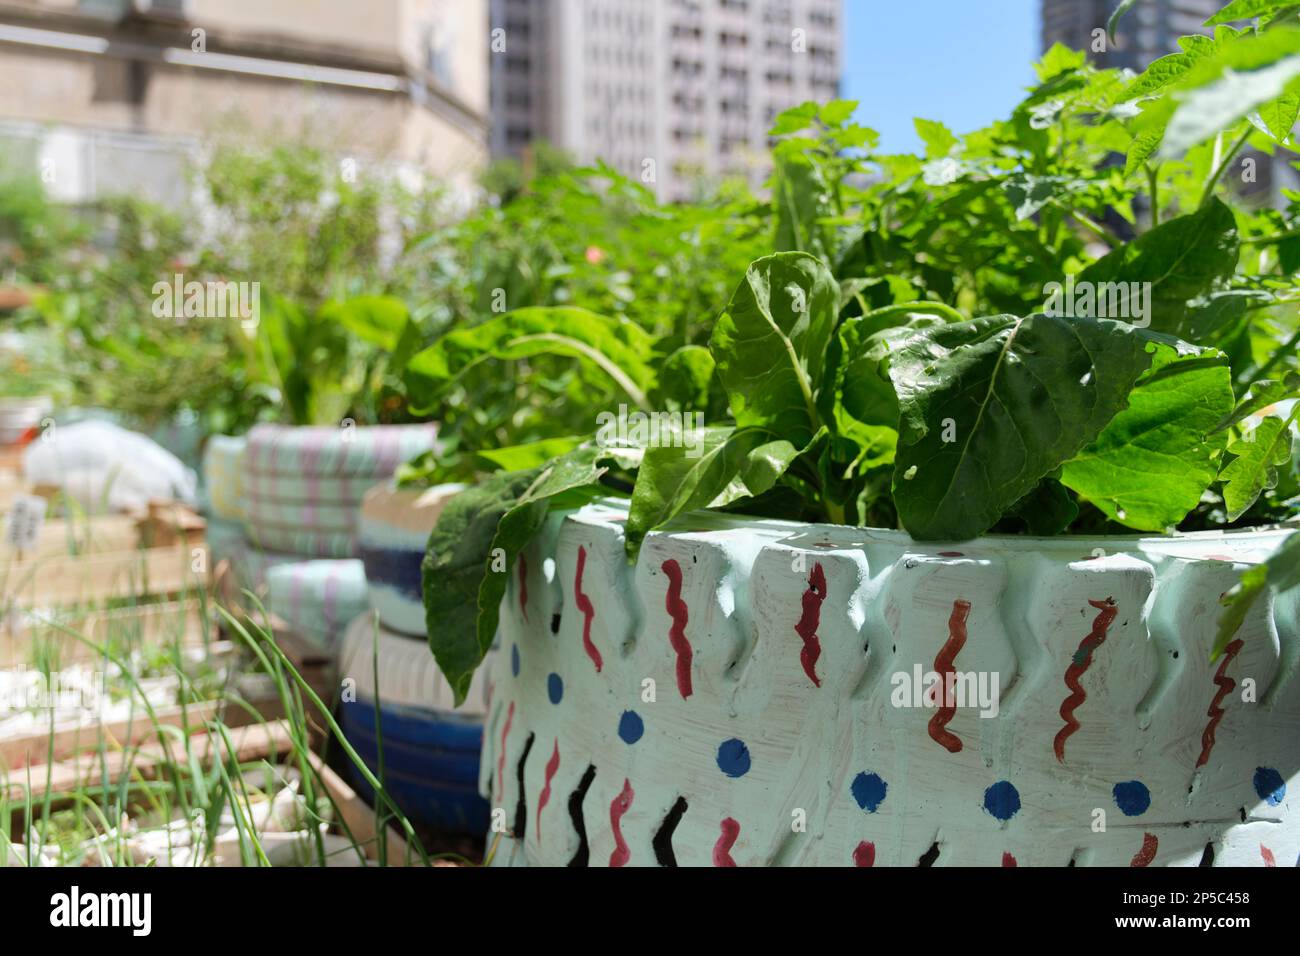 Edible plants planted in reused old tires in an urban vegetable garden, sustainable production of healthy food in the city. Concepts of agriculture, s Stock Photo